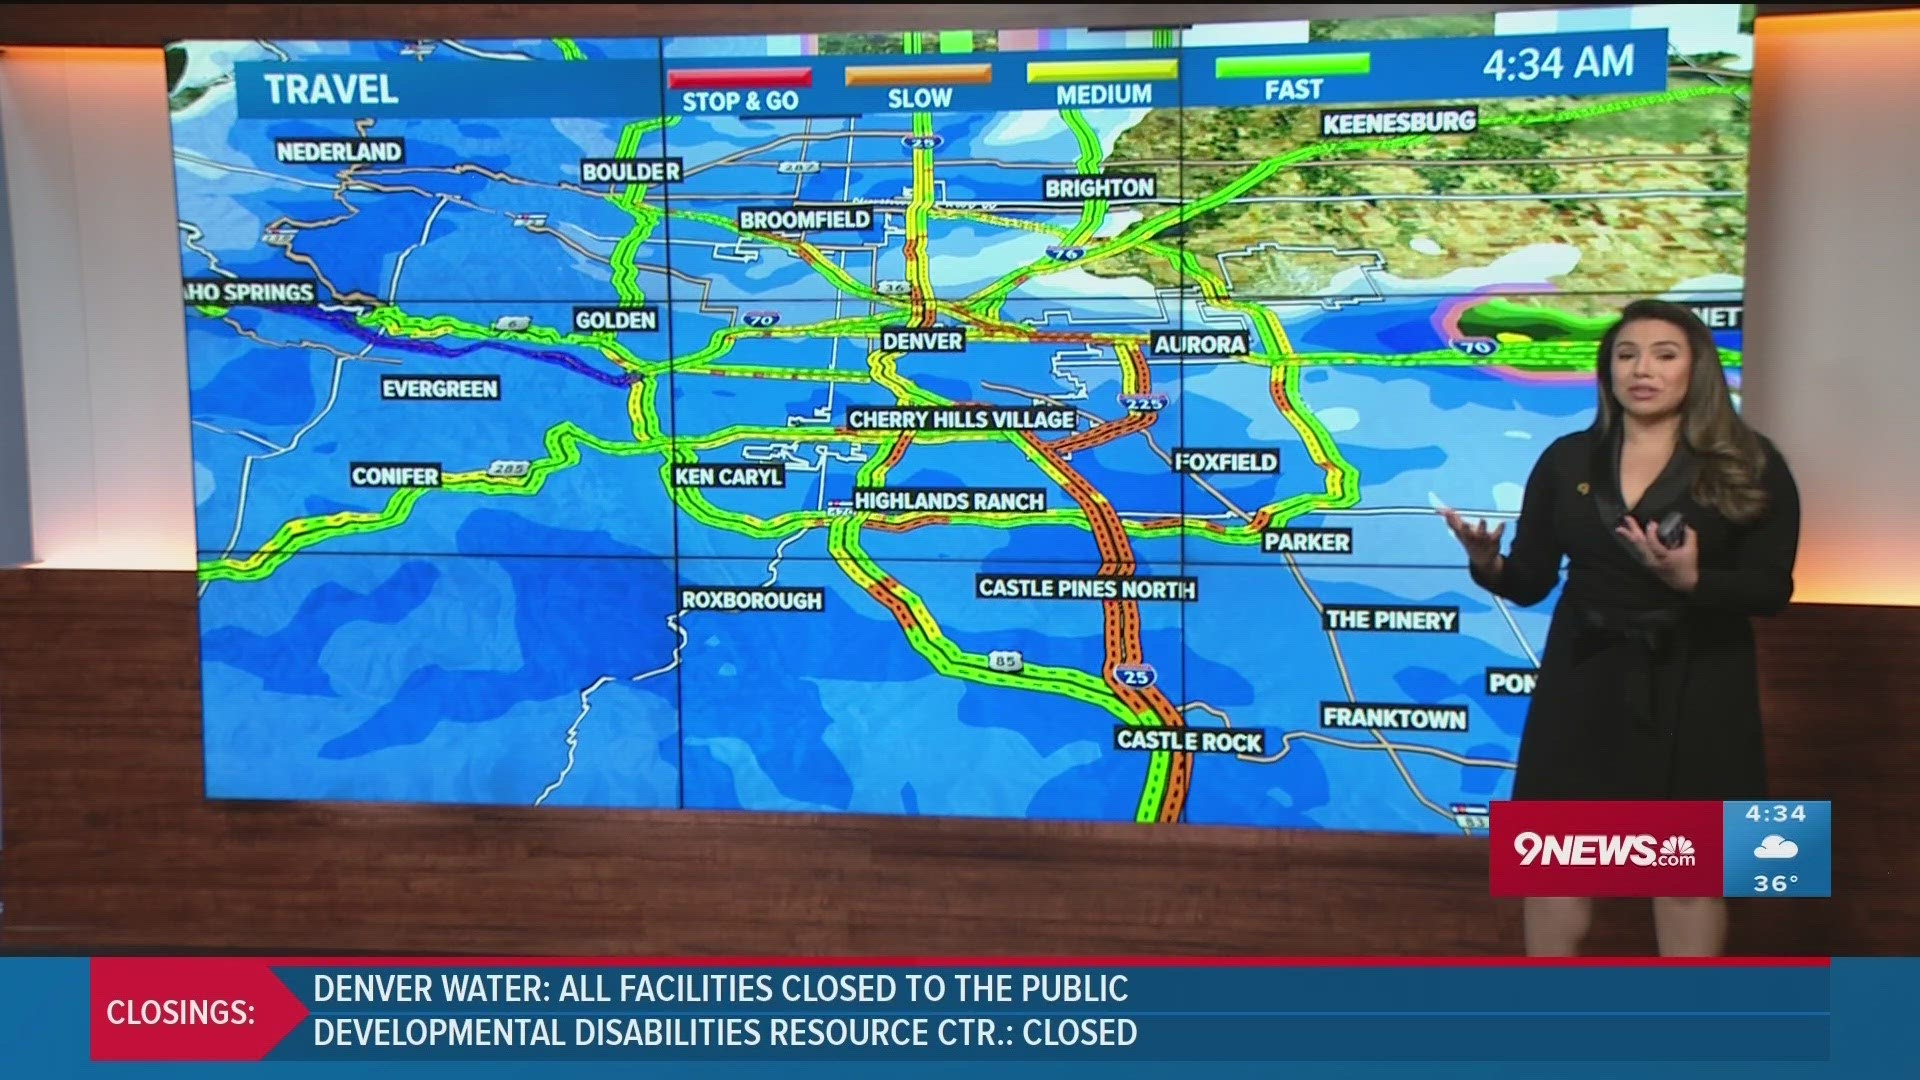 9NEWS traffic reporter covers the roads during Colorado's snowstorm.